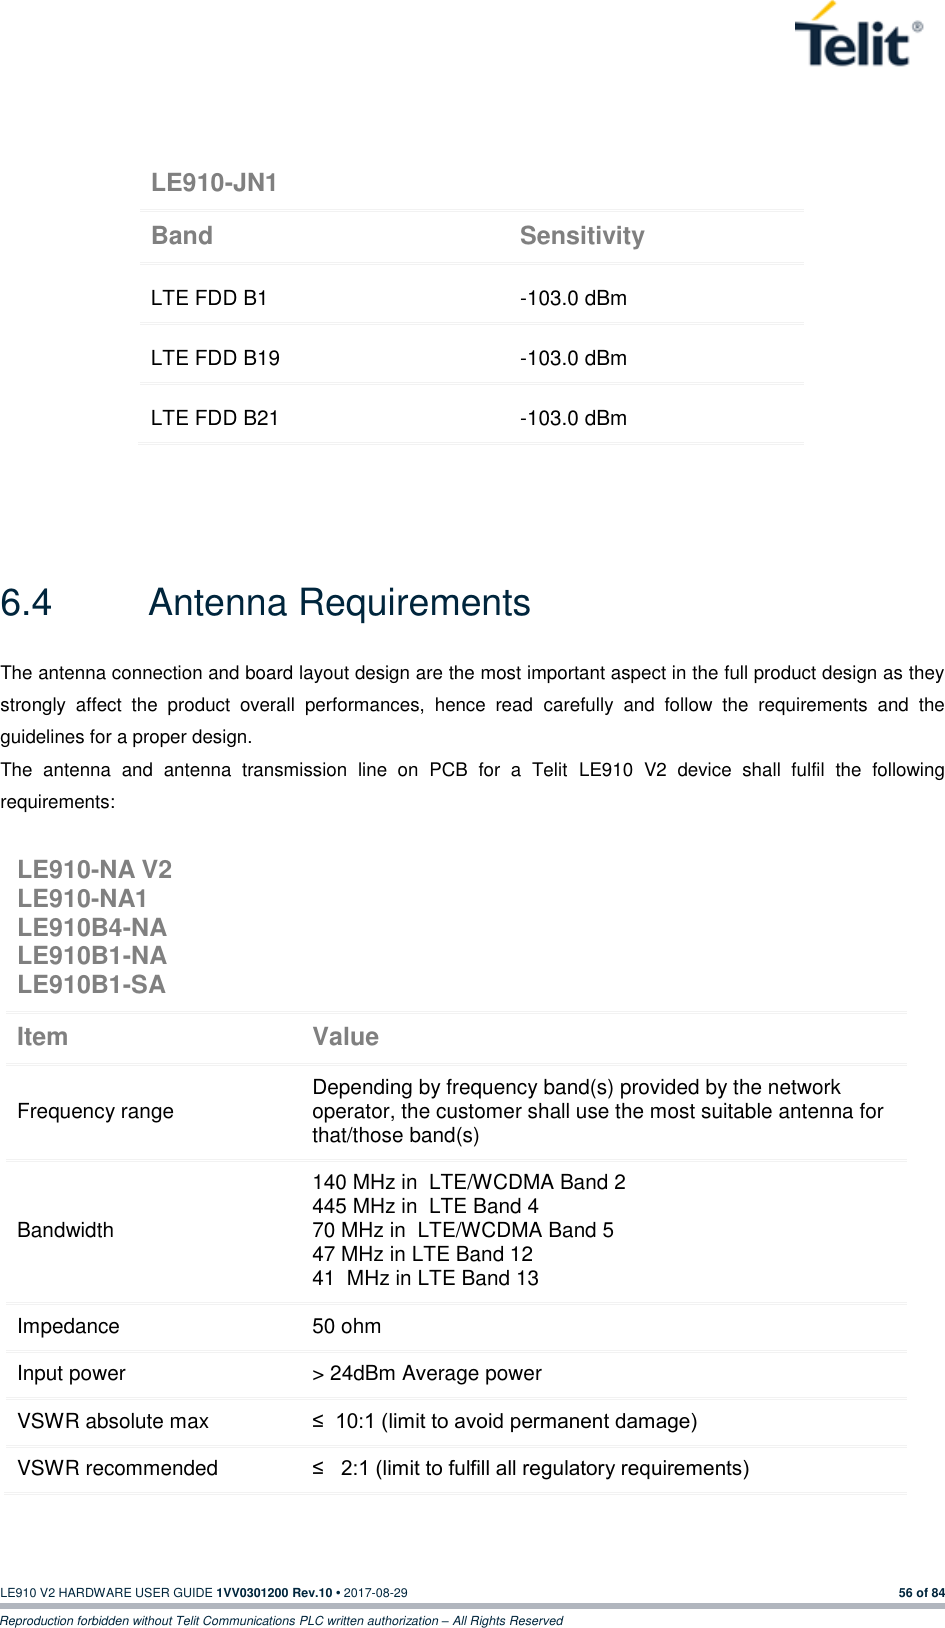   LE910 V2 HARDWARE USER GUIDE 1VV0301200 Rev.10 • 2017-08-29  56 of 84 Reproduction forbidden without Telit Communications PLC written authorization – All Rights Reserved           6.4  Antenna Requirements The antenna connection and board layout design are the most important aspect in the full product design as they strongly  affect  the  product  overall  performances,  hence  read  carefully  and  follow  the  requirements  and  the guidelines for a proper design. The  antenna  and  antenna  transmission  line  on  PCB  for  a  Telit  LE910  V2  device  shall  fulfil  the  following requirements:  LE910-JN1 Band Sensitivity LTE FDD B1 -103.0 dBm LTE FDD B19 -103.0 dBm LTE FDD B21 -103.0 dBm LE910-NA V2 LE910-NA1 LE910B4-NA LE910B1-NA LE910B1-SA  Item Value Frequency range Depending by frequency band(s) provided by the network operator, the customer shall use the most suitable antenna for that/those band(s) Bandwidth 140 MHz in  LTE/WCDMA Band 2 445 MHz in  LTE Band 4 70 MHz in  LTE/WCDMA Band 5 47 MHz in LTE Band 12 41  MHz in LTE Band 13 Impedance 50 ohm Input power &gt; 24dBm Average power VSWR absolute max ≤  10:1 (limit to avoid permanent damage) VSWR recommended ≤   2:1 (limit to fulfill all regulatory requirements) 